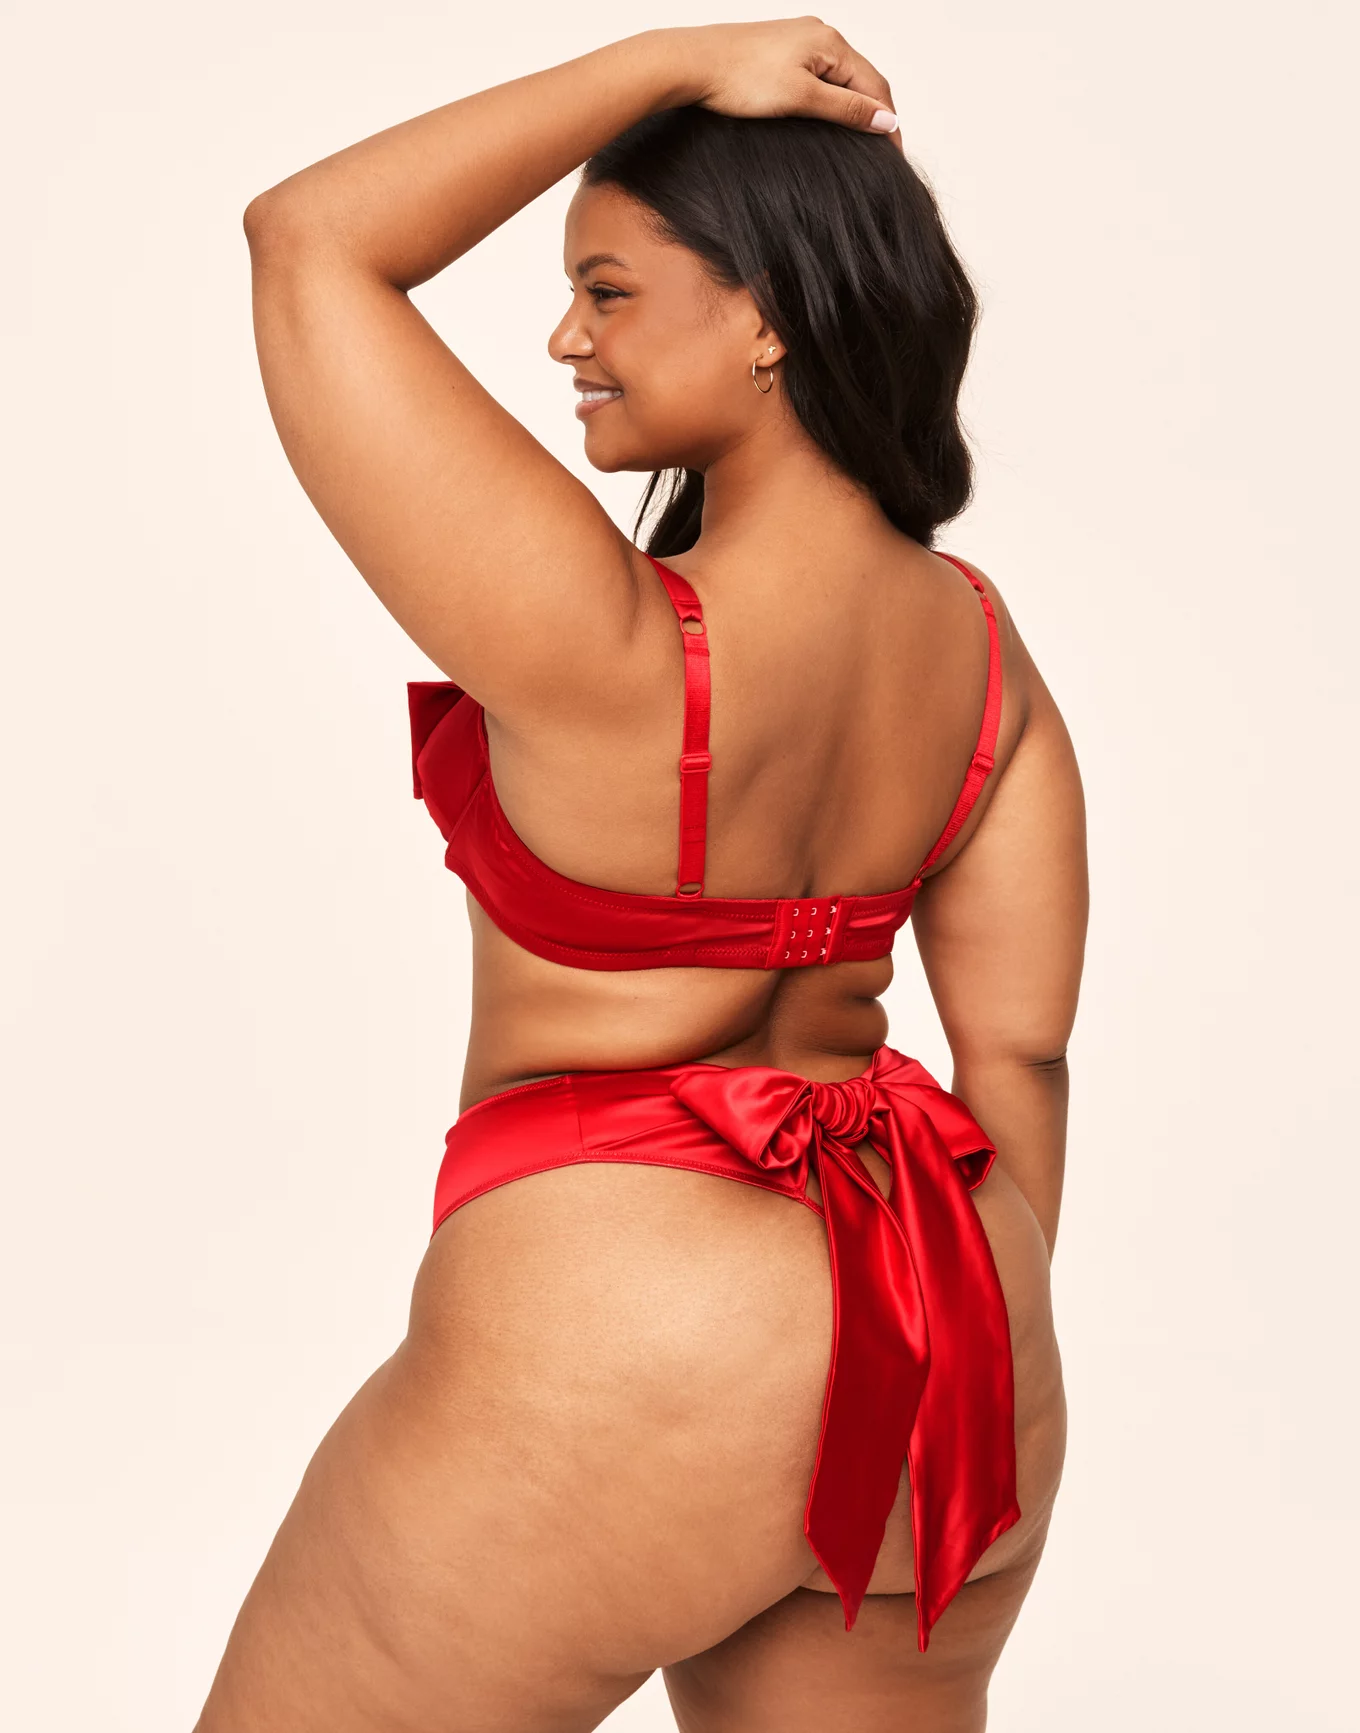 YeeHoo Women's Sexy Lingerie Red featuring satin bow bodice